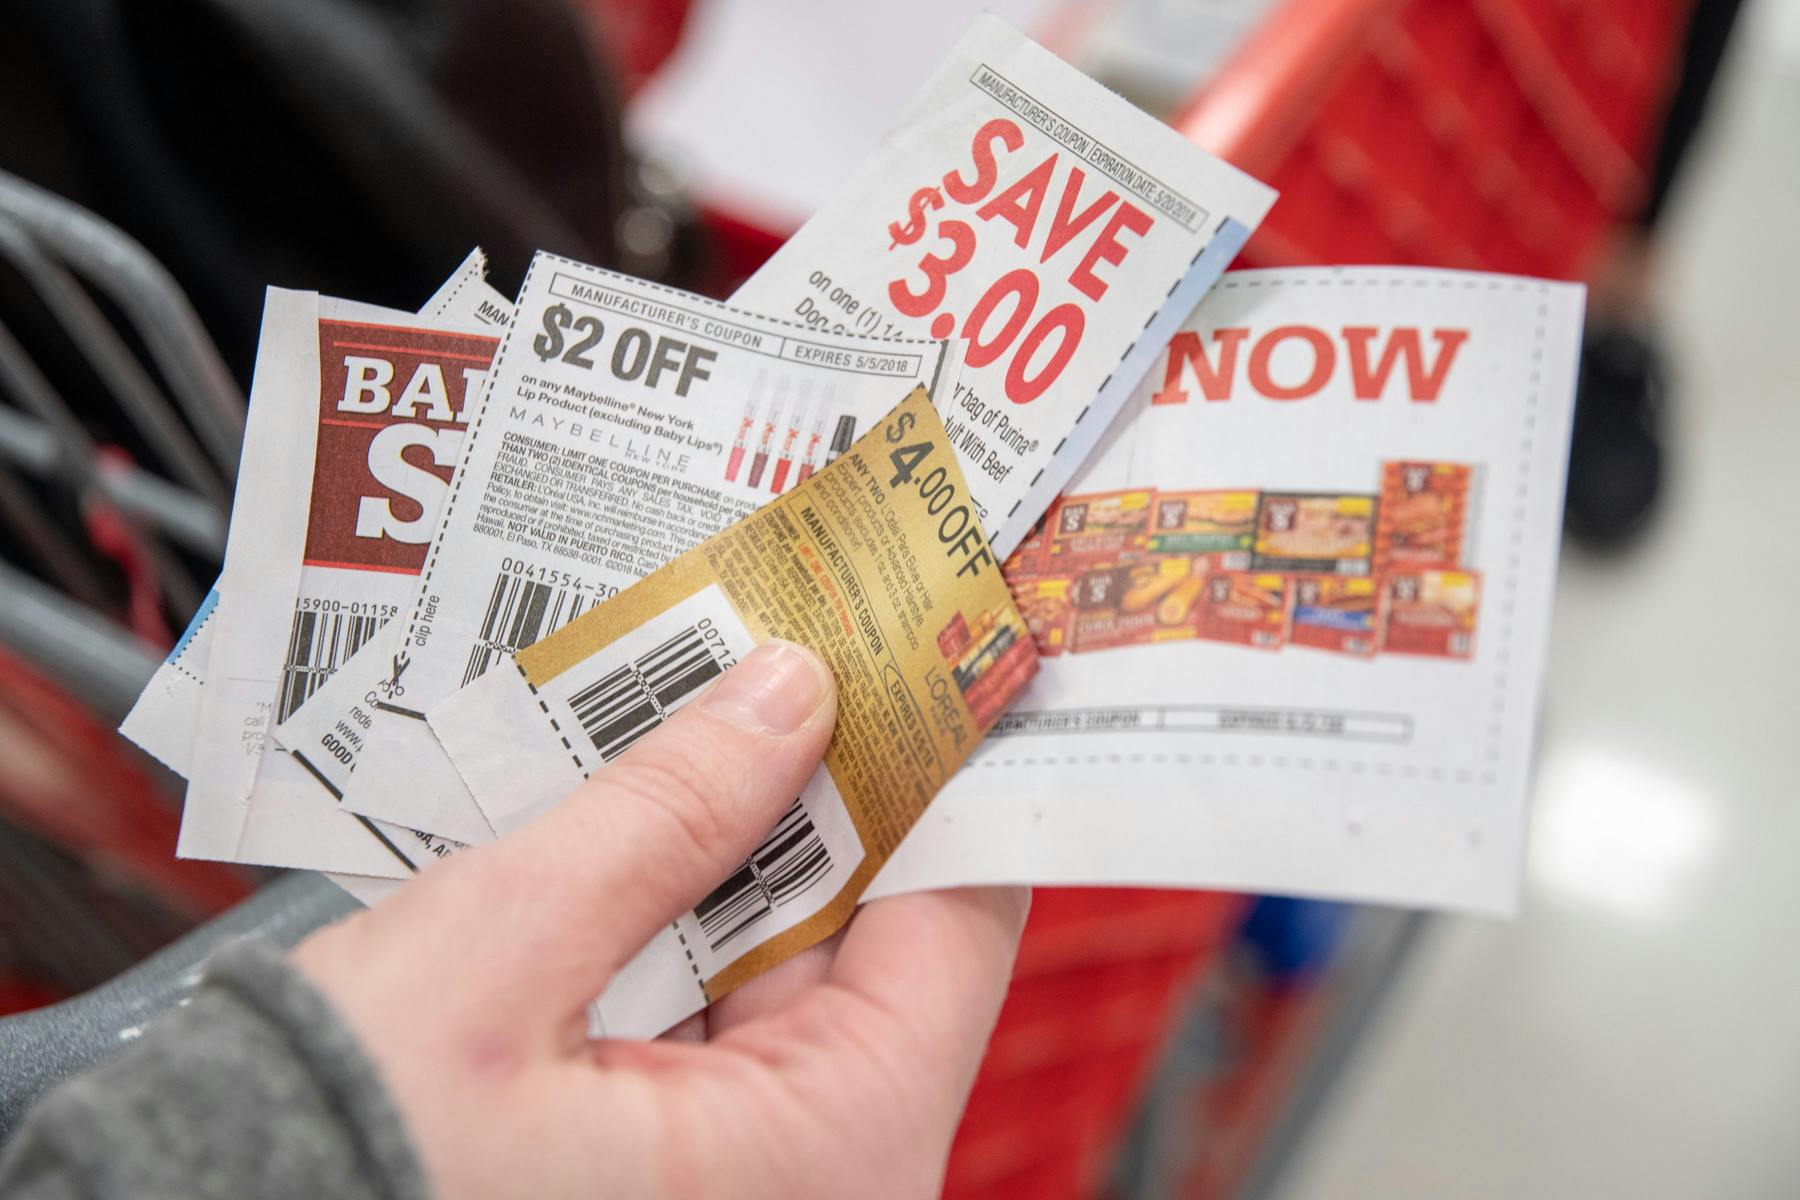 How to Get Coupons - The Krazy Coupon Lady